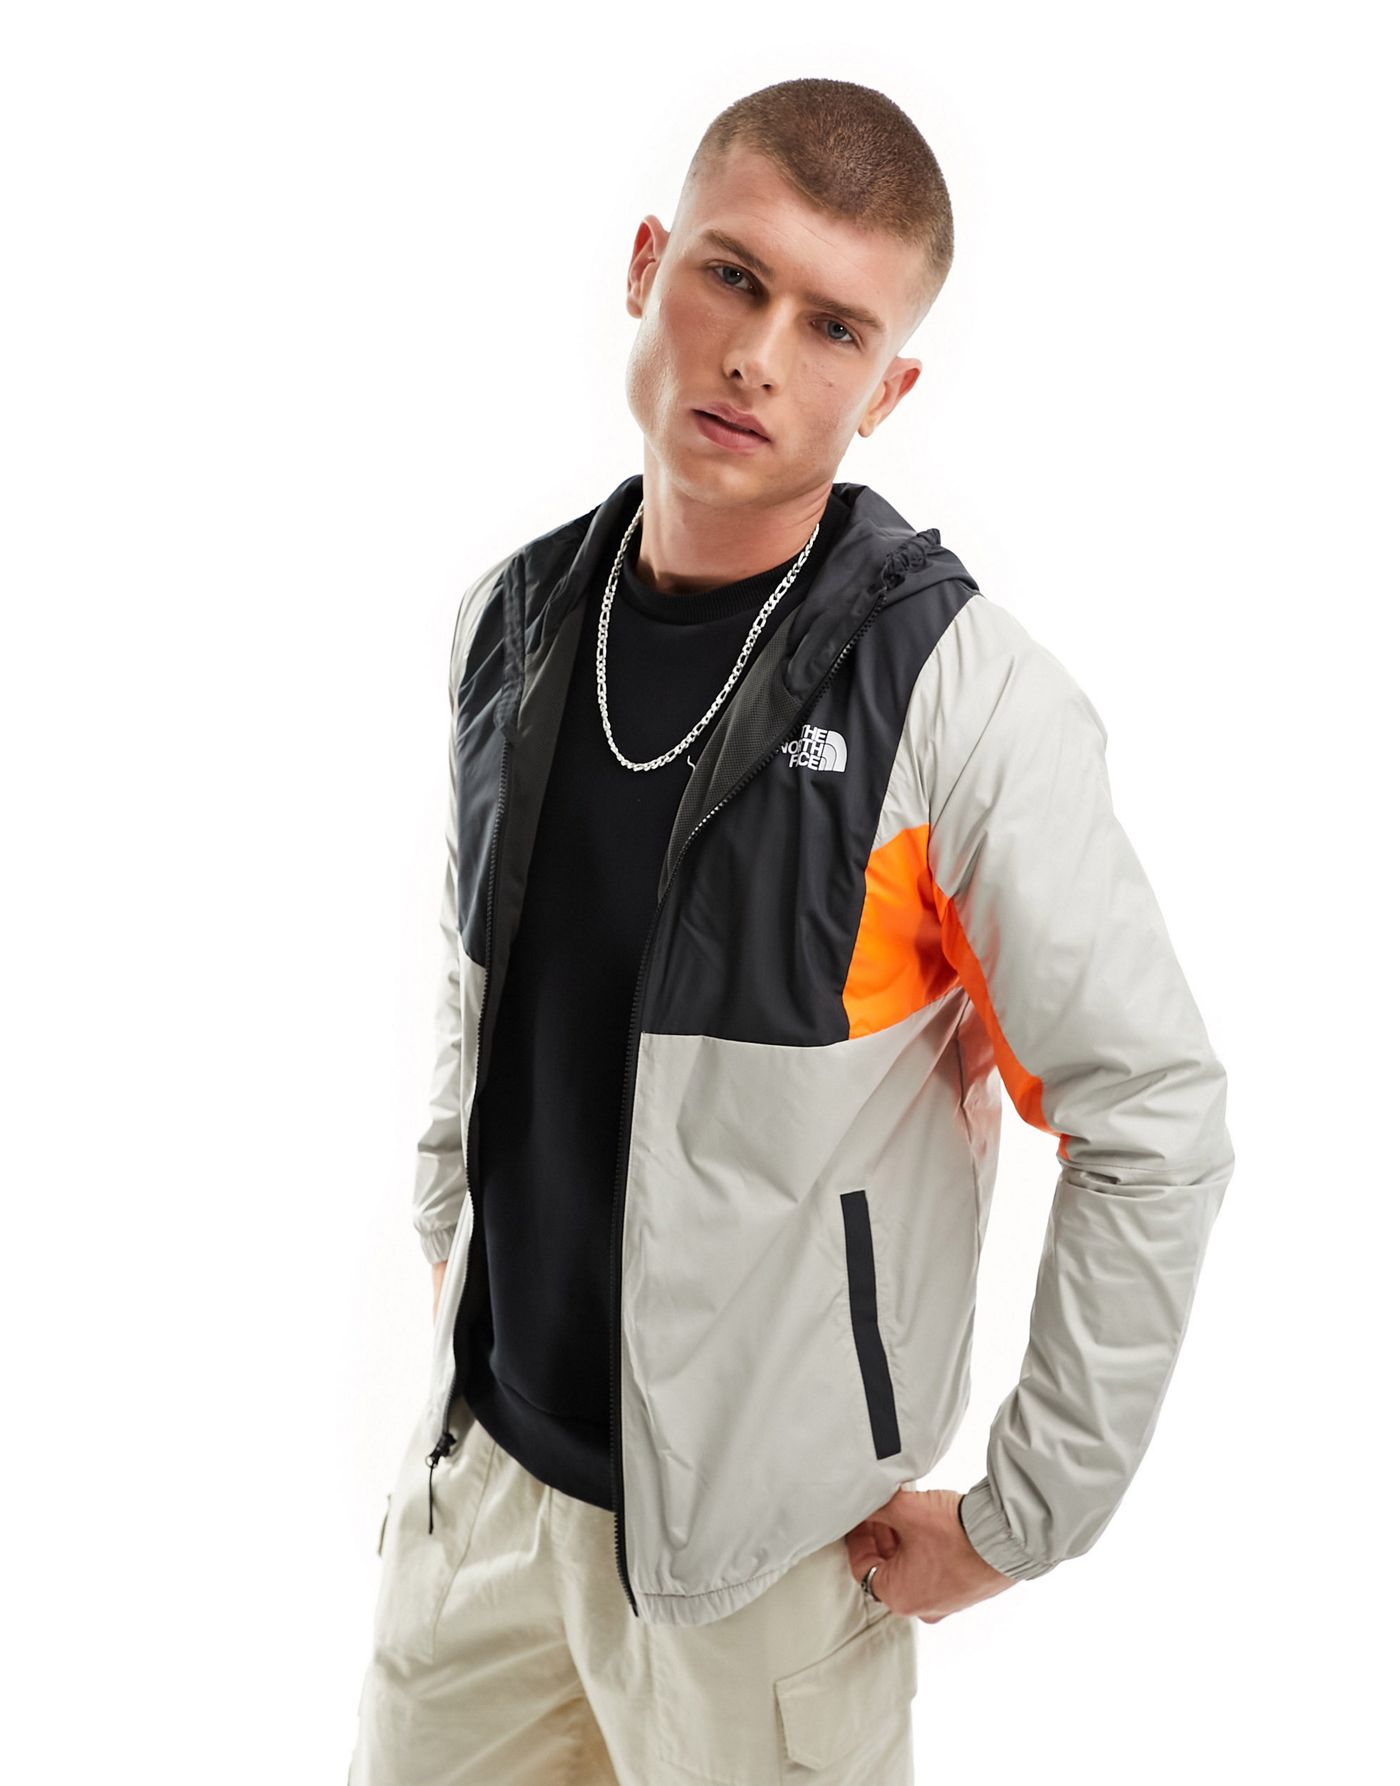 The North Face Training Mountain Athletic zip up hooded wind jacket in grey and orange